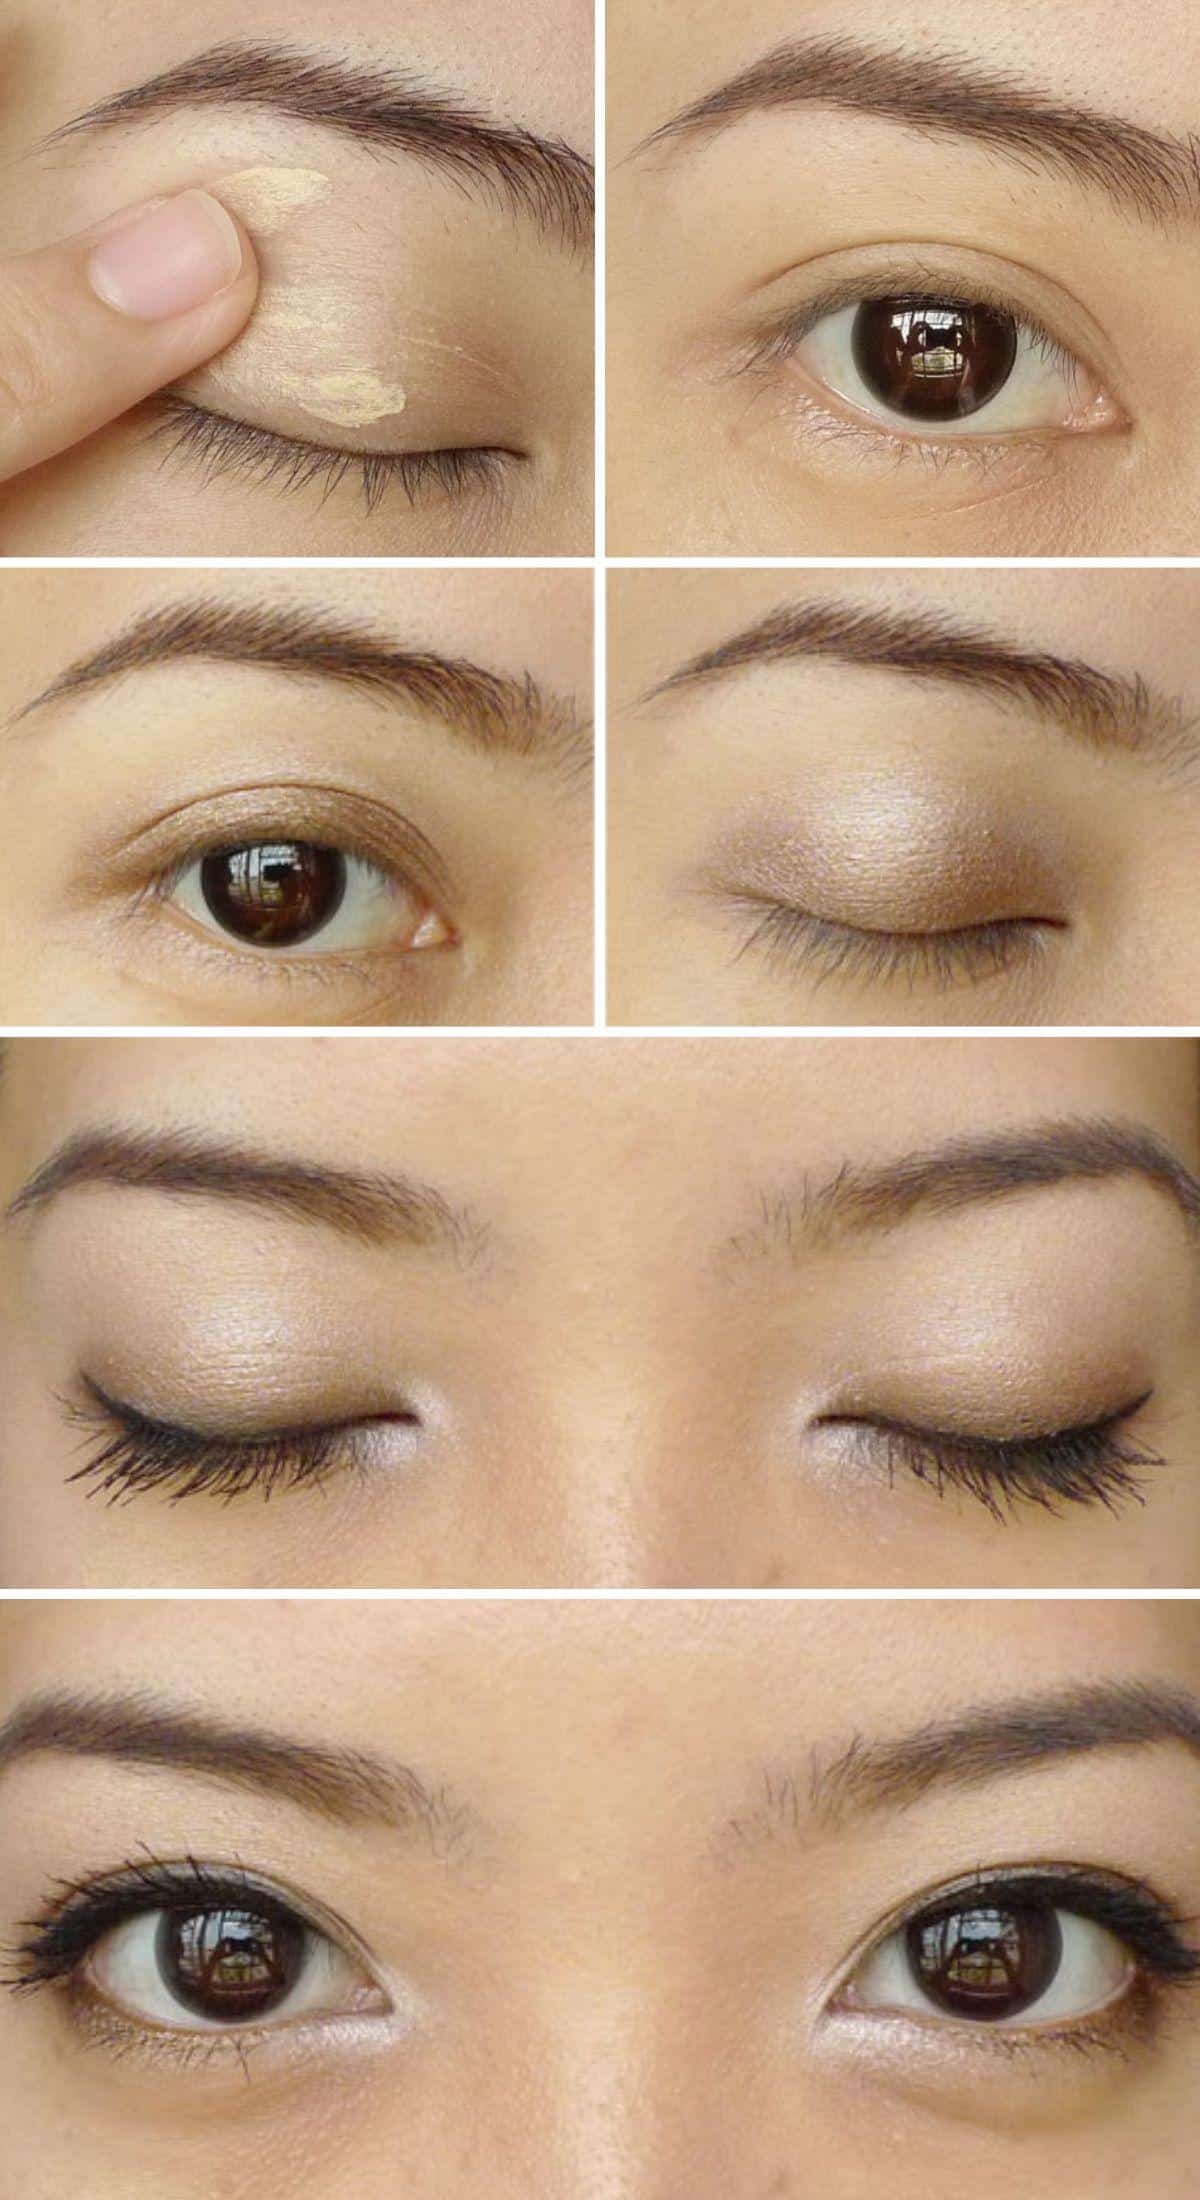 How to Apply Eye Makeup Like a Pro collage.